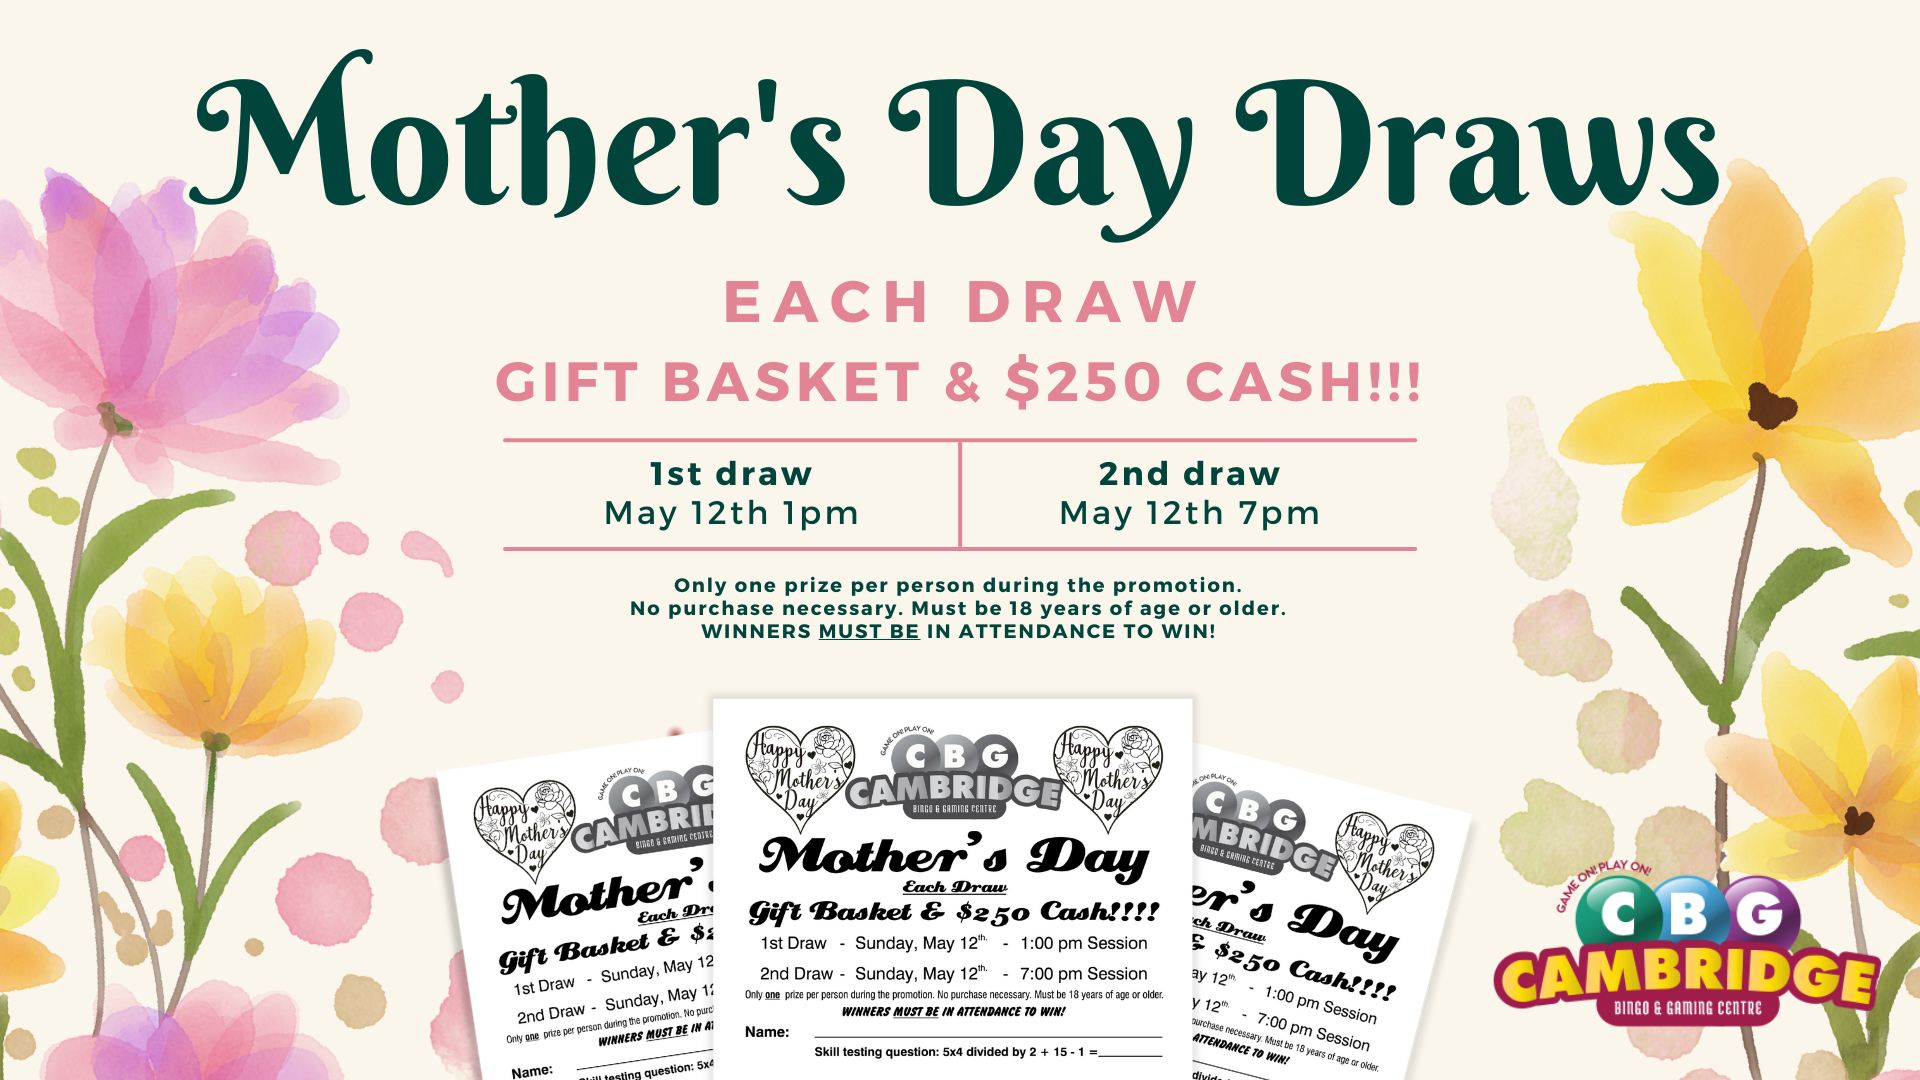 bingo on Mother's Day - win jackpots and cash draws